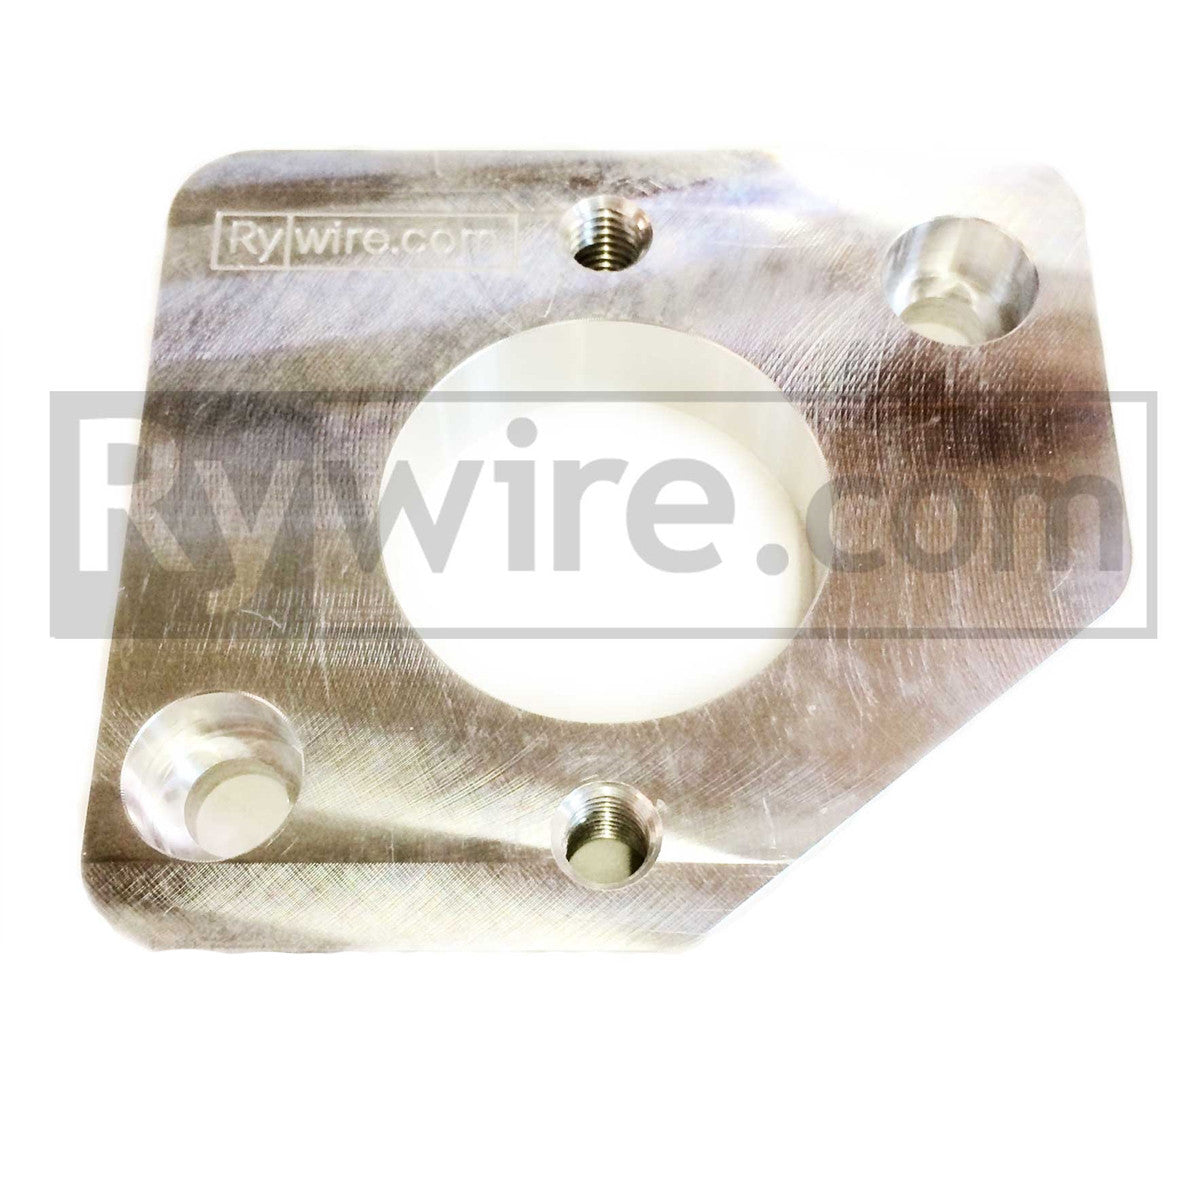 Rywire Wilwood/Tilton Clutch Conversion Plate